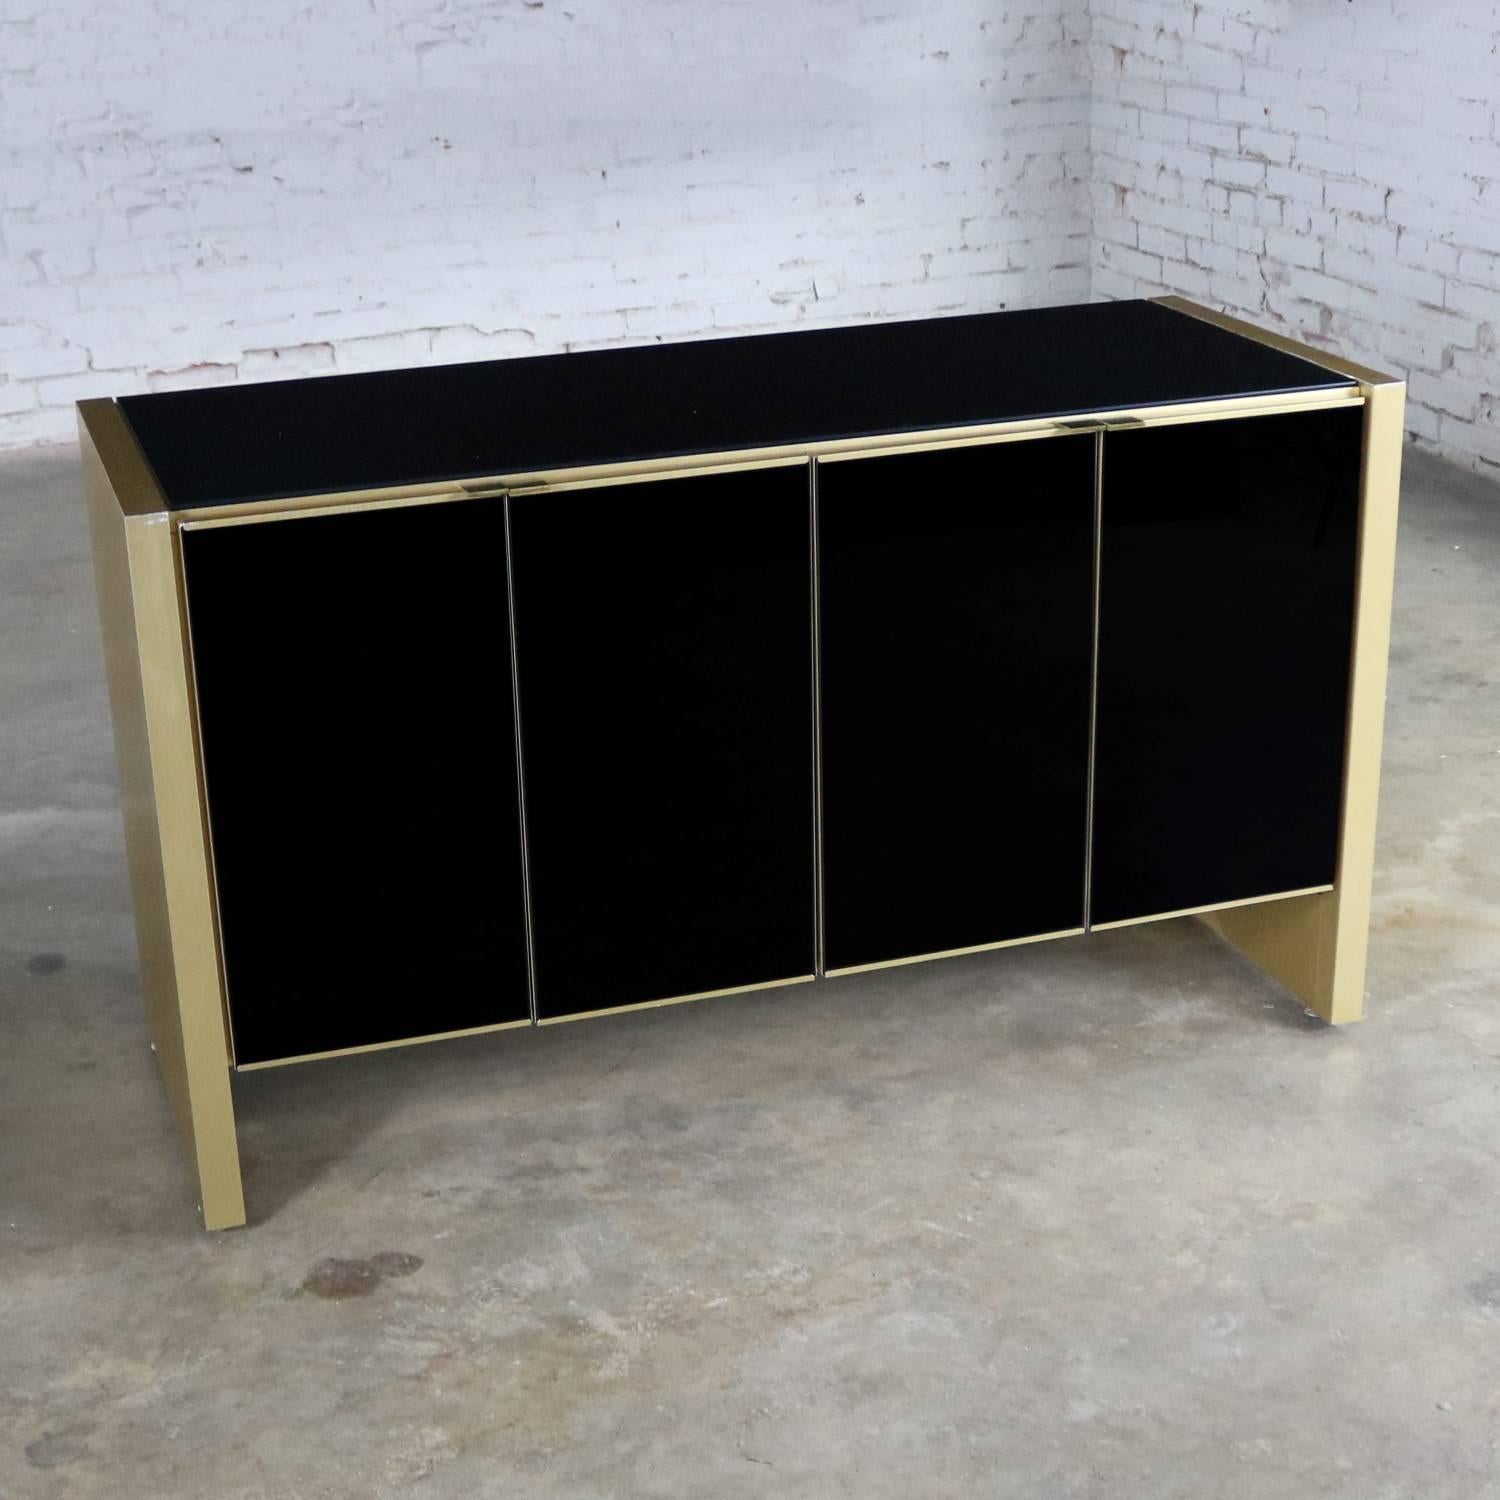 Elegant small credenza or server cabinet attributed to Ello in black glass and gold anodized and brushed aluminum. It is in wonderful vintage condition. There are a few nicks and dings in the aluminum laminate and there is one small spot on a glass